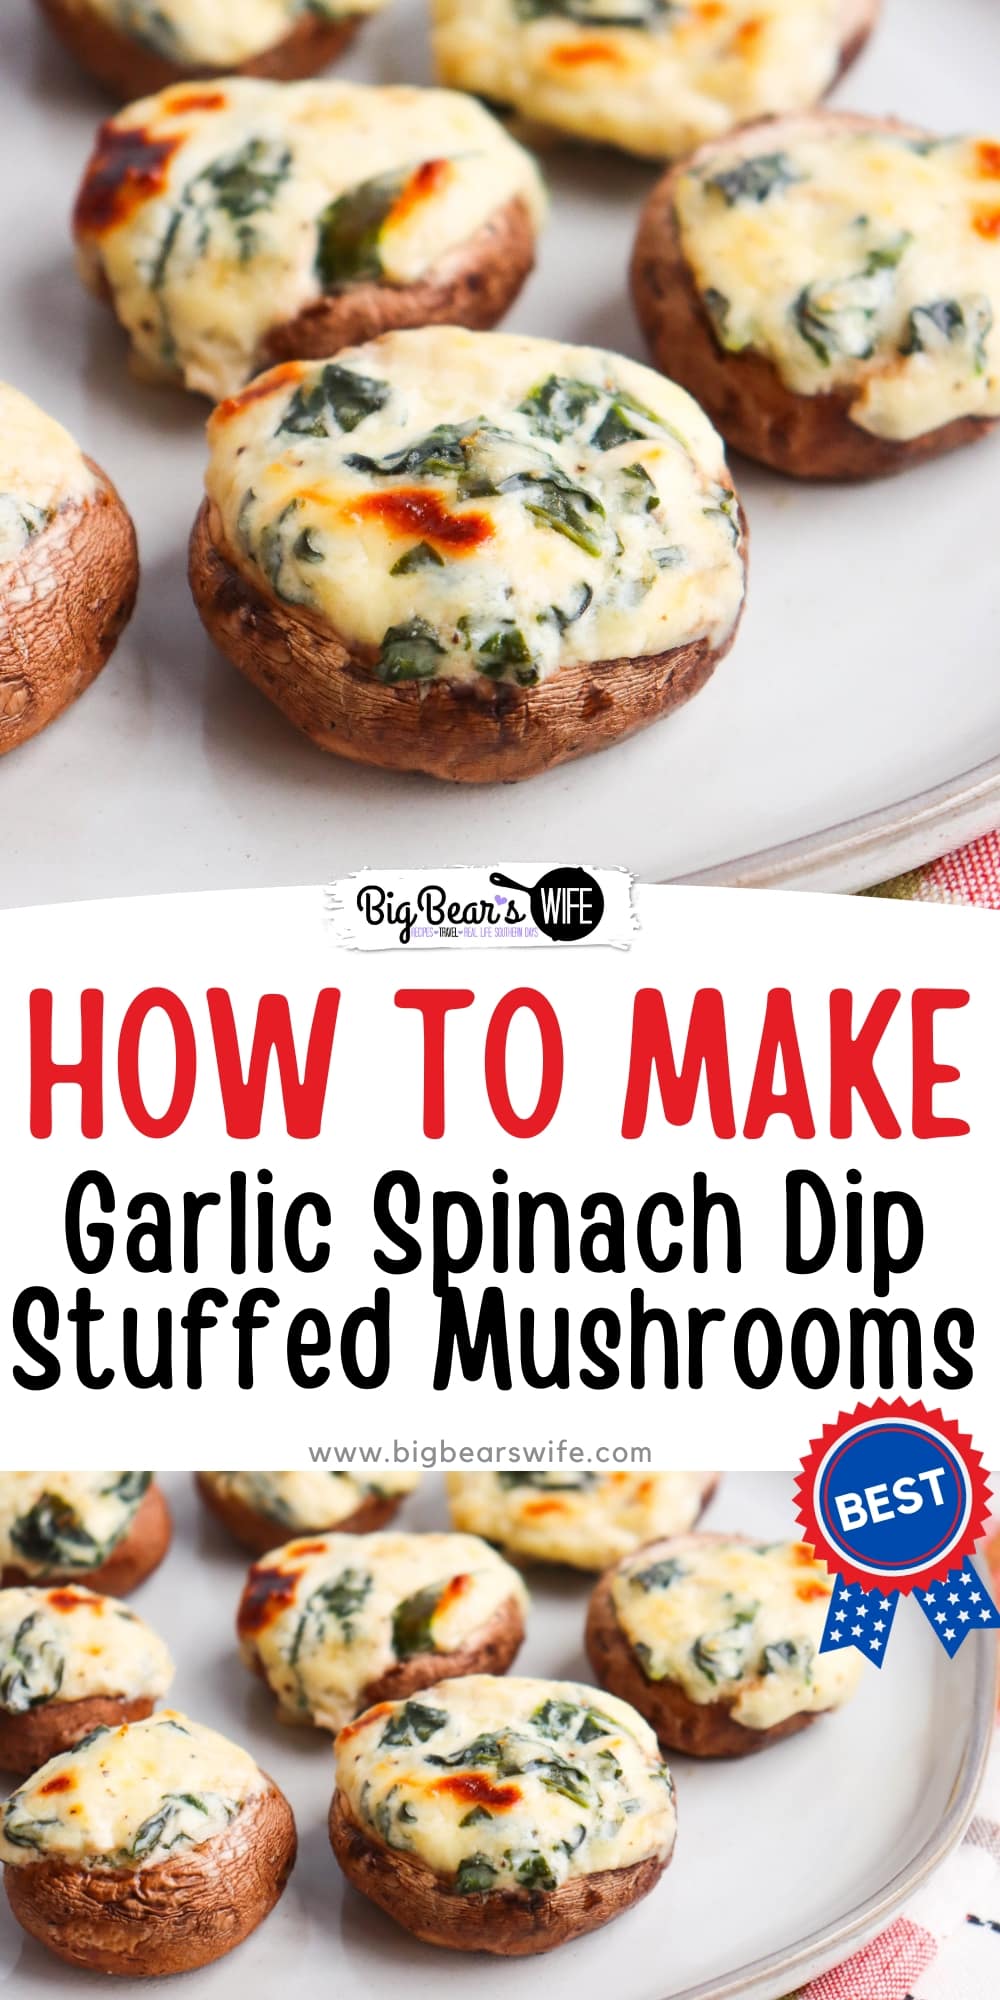 The creamy and flavorful garlic spinach dip perfectly complements the earthy mushrooms, creating a bite that is both decadent and satisfying. Whether you're hosting a party or looking for a gourmet snack, these Garlic Spinach Dip Stuffed Mushrooms will delight your senses and leave you craving more. via @bigbearswife